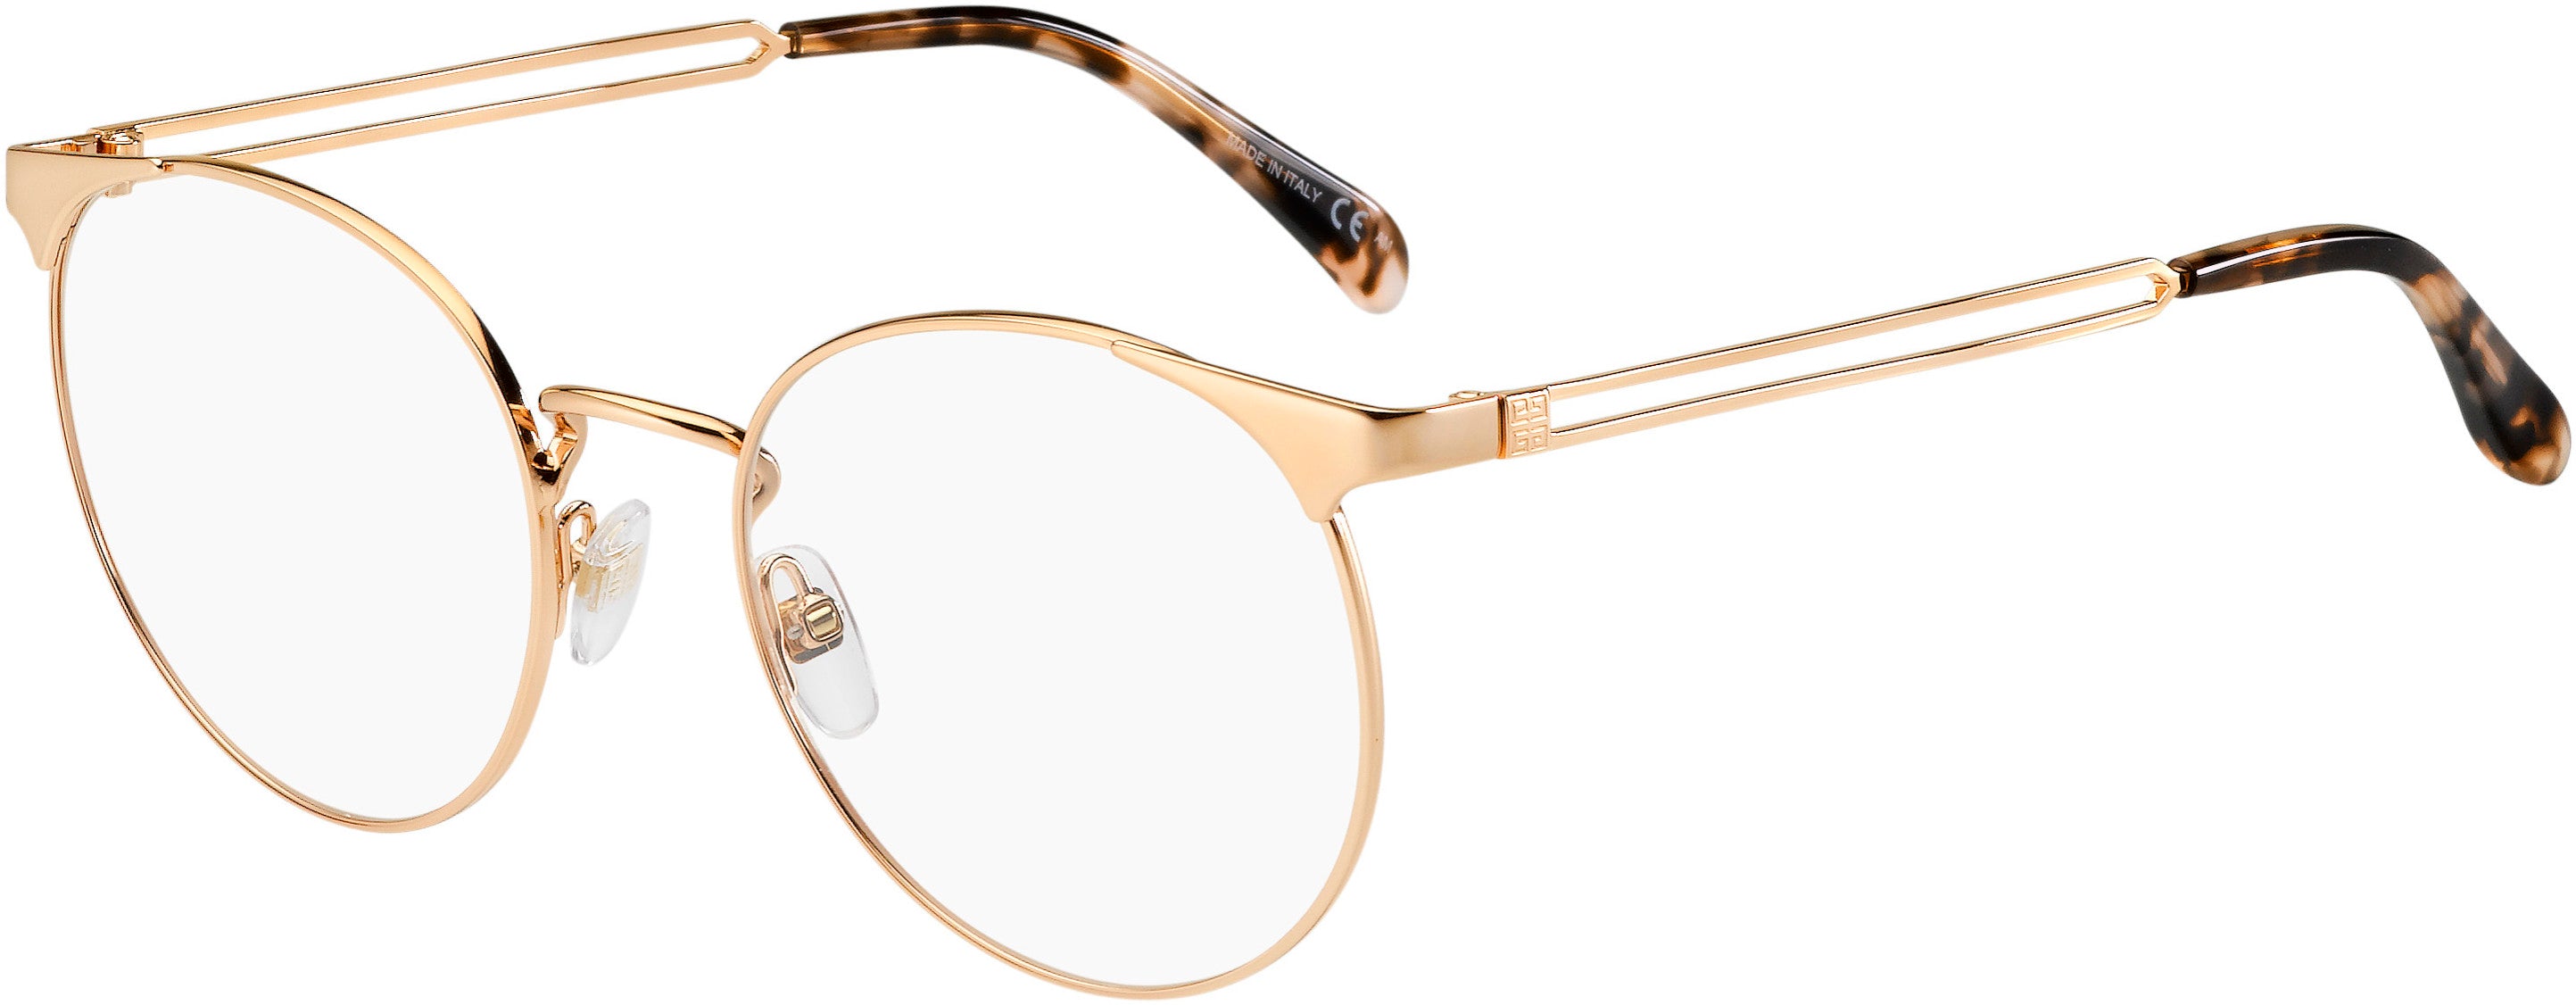  Givenchy 0096 Oval Modified Eyeglasses 0DDB-0DDB  Gold Copper (00 Demo Lens)